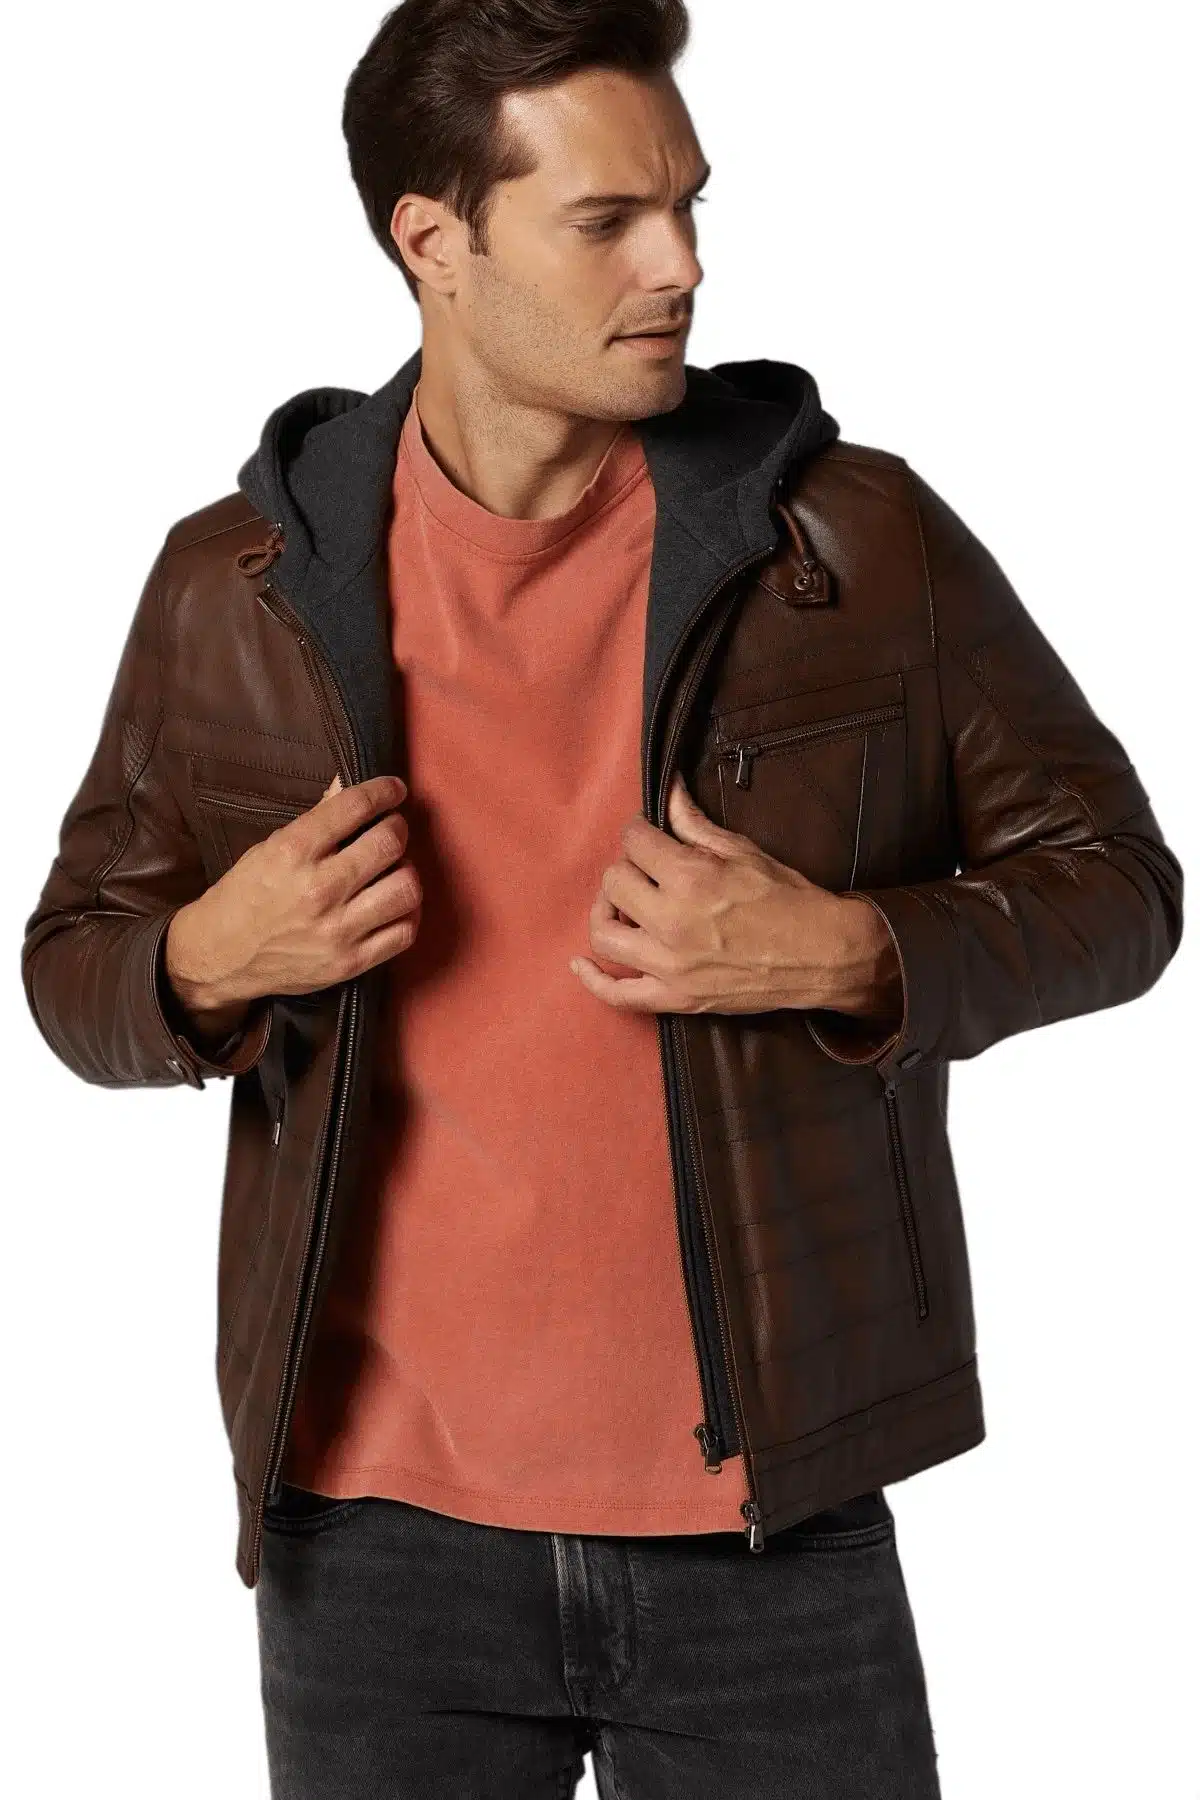 Hooded Classic Brown Men’s Leather Jacket (5)_result